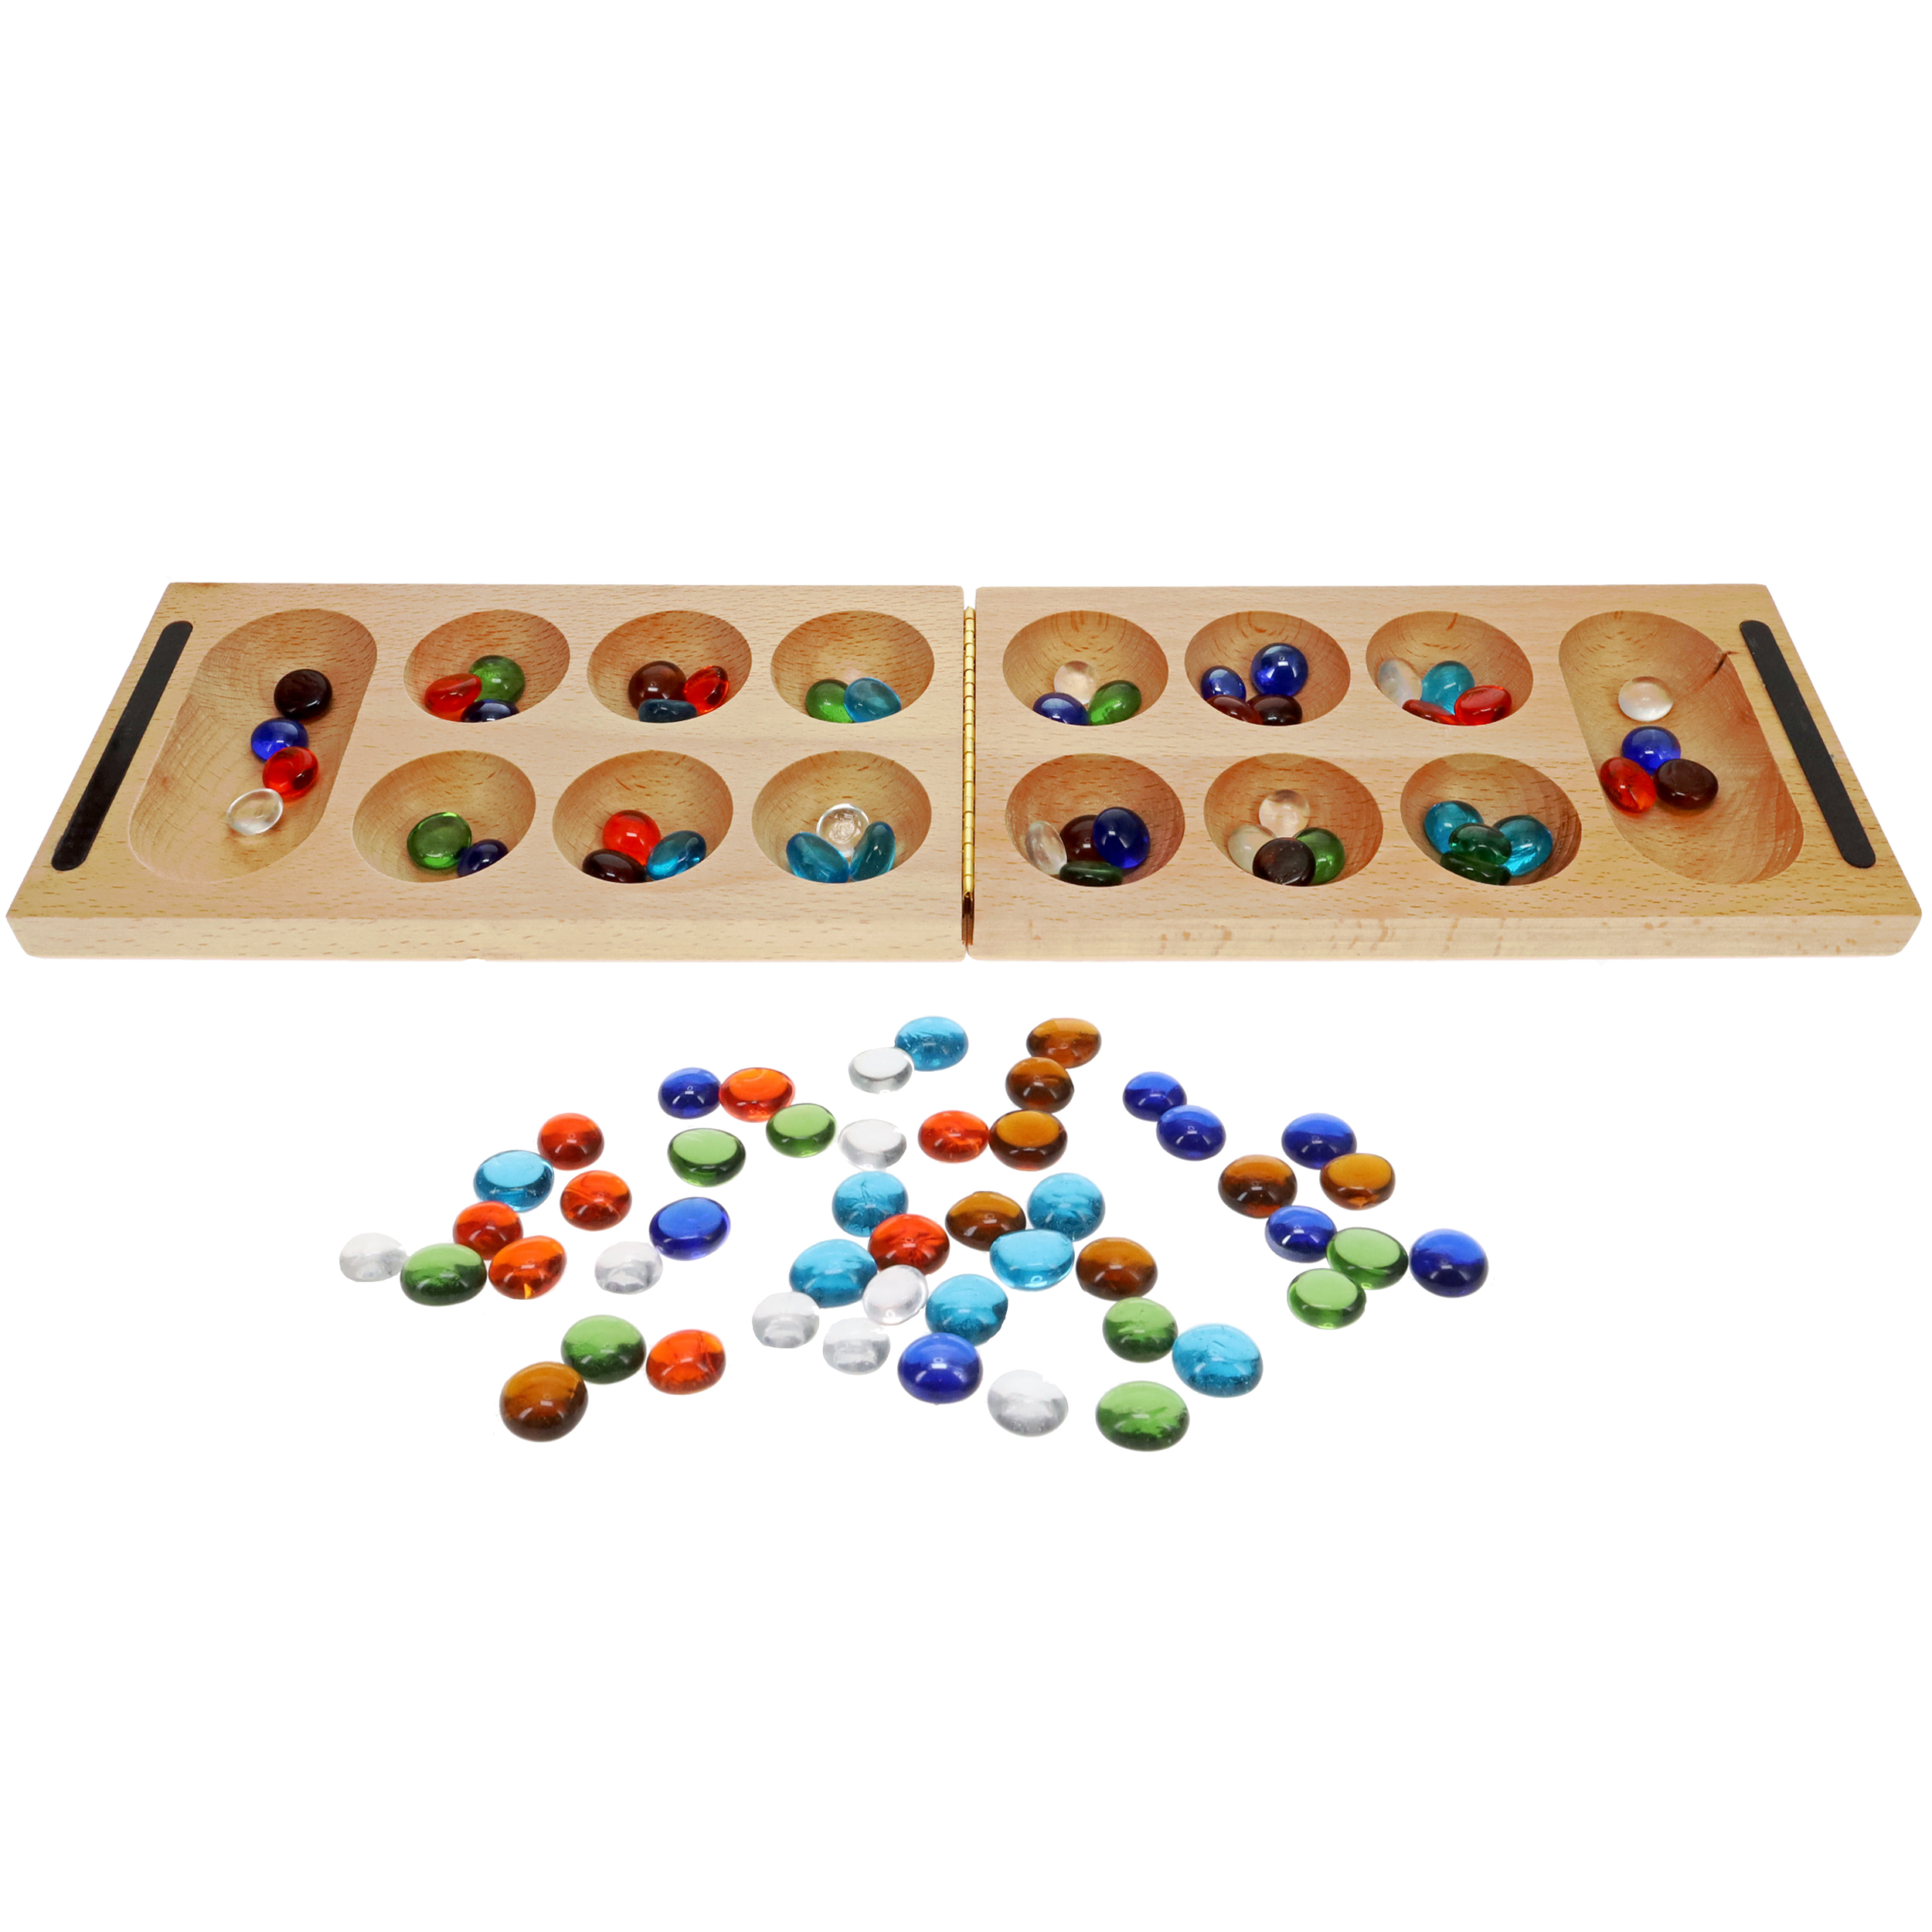 Mancala African Stone Game Wooden Board with 43 Glass Stones